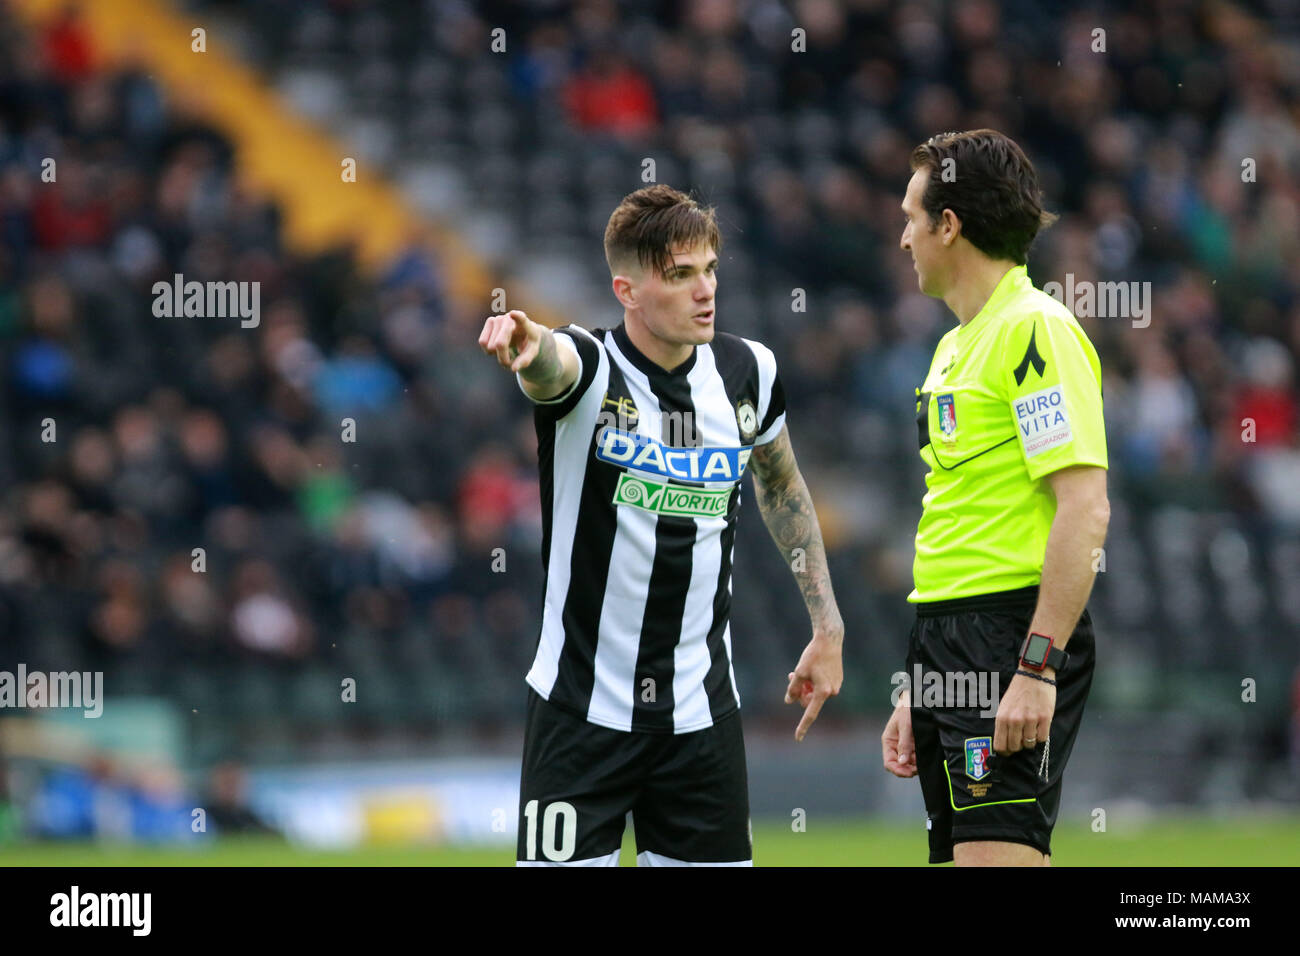 Udine, Italy. 3rd April, 2018. ITALY, Udine: Udinese's forward Rodrigo De Paul (L) speaks with Referee Luca Banti during the Serie A football match between Udinese Calcio v AC Fiorentina at Dacia Arena Stadium on 3rd April, 2018. Credit: Andrea Spinelli/Alamy Live News Stock Photo